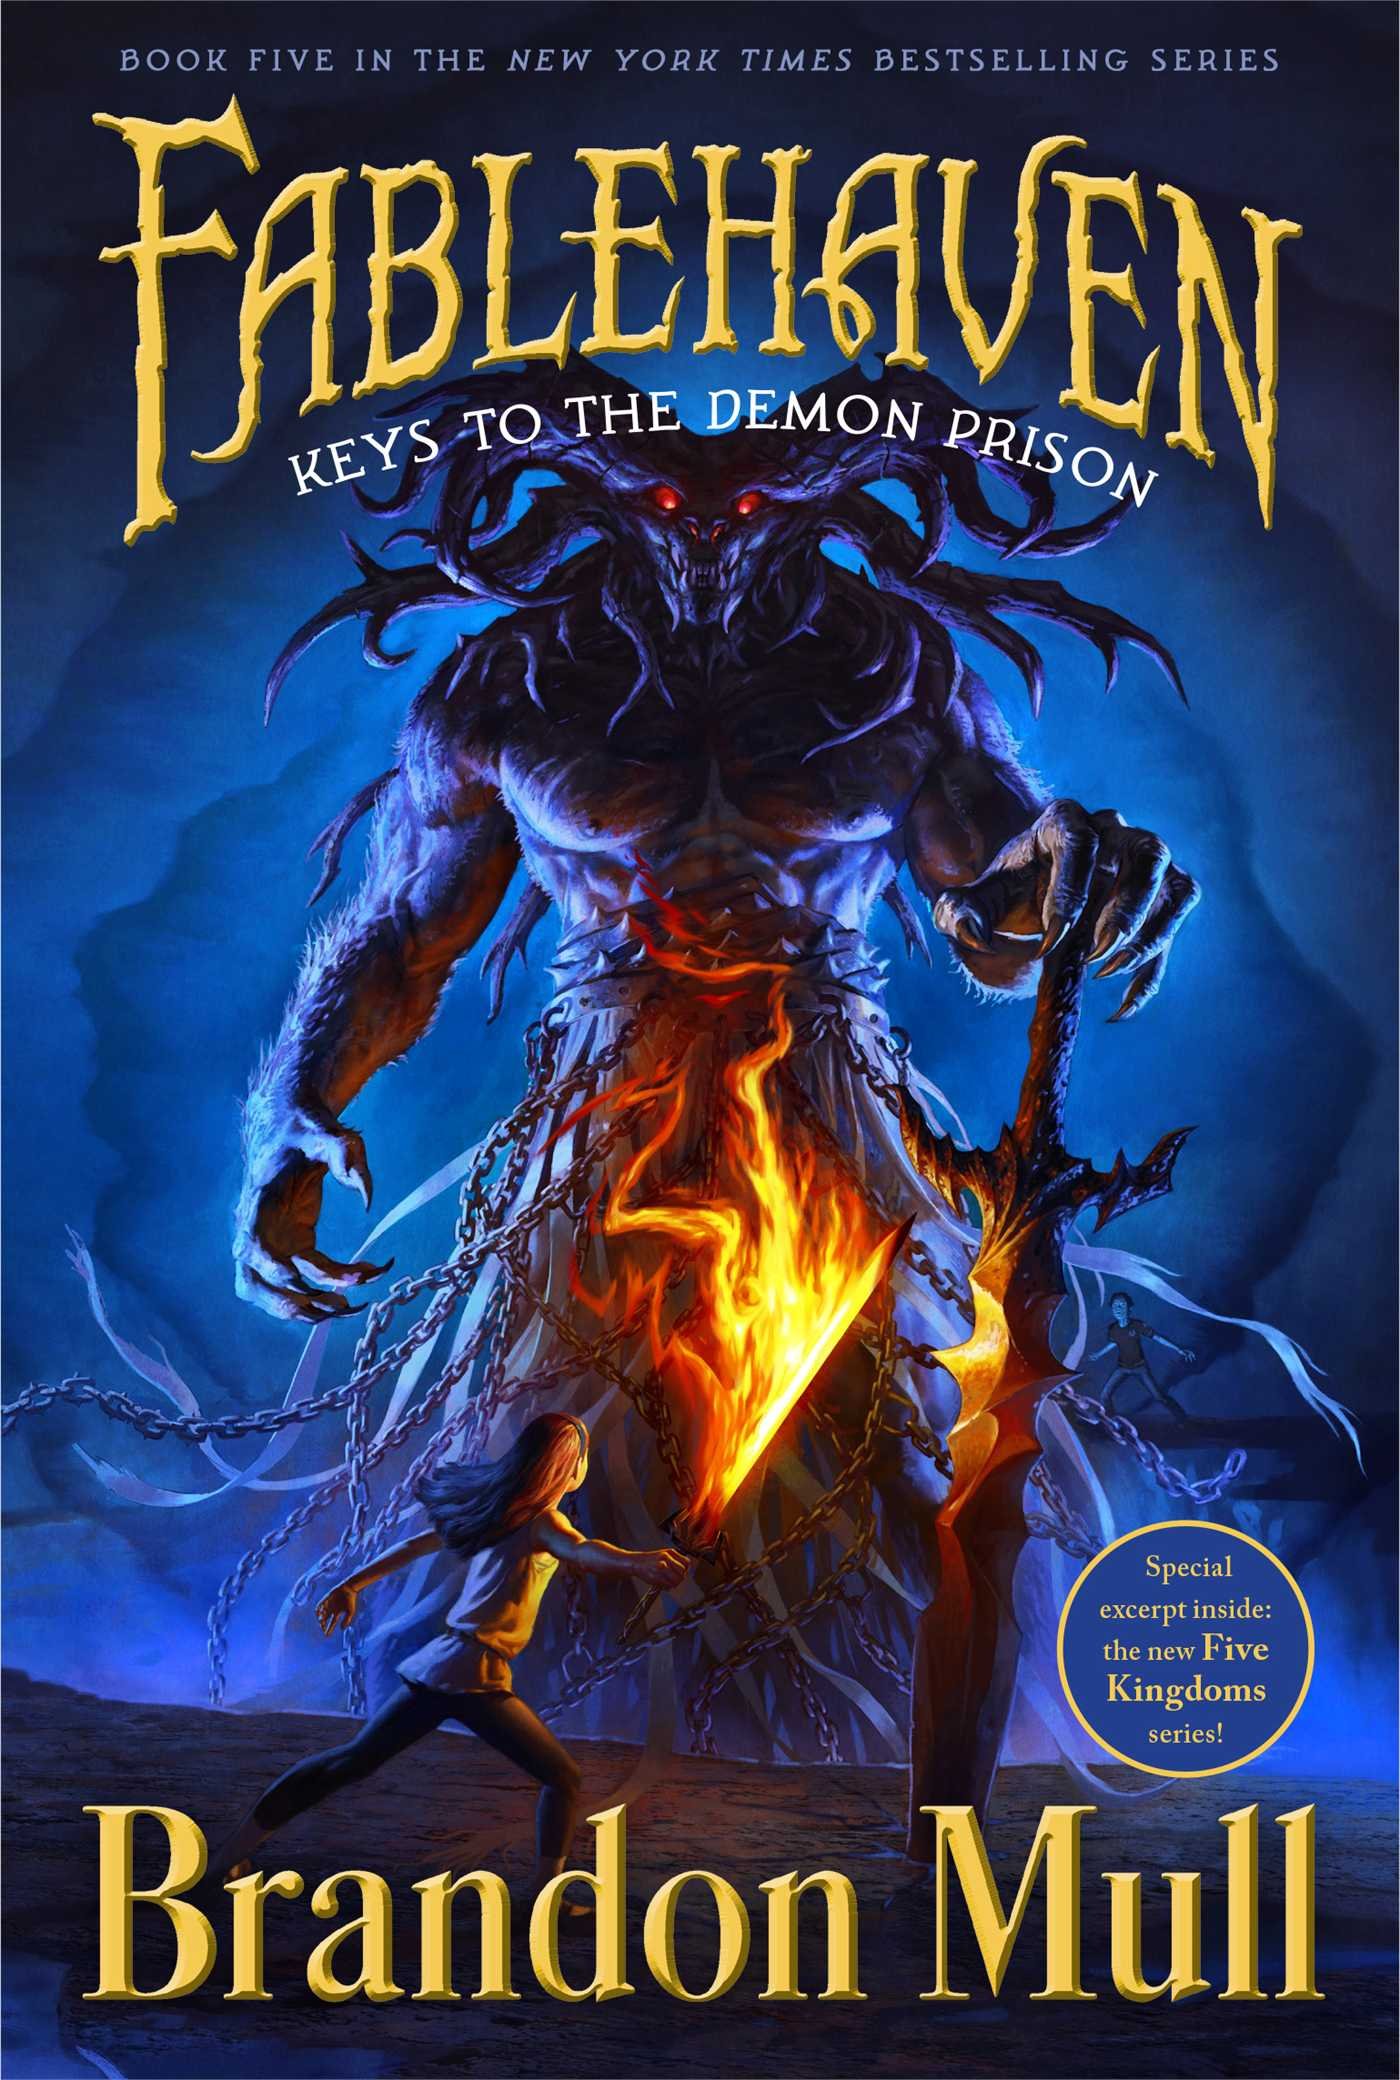 book about world of demons